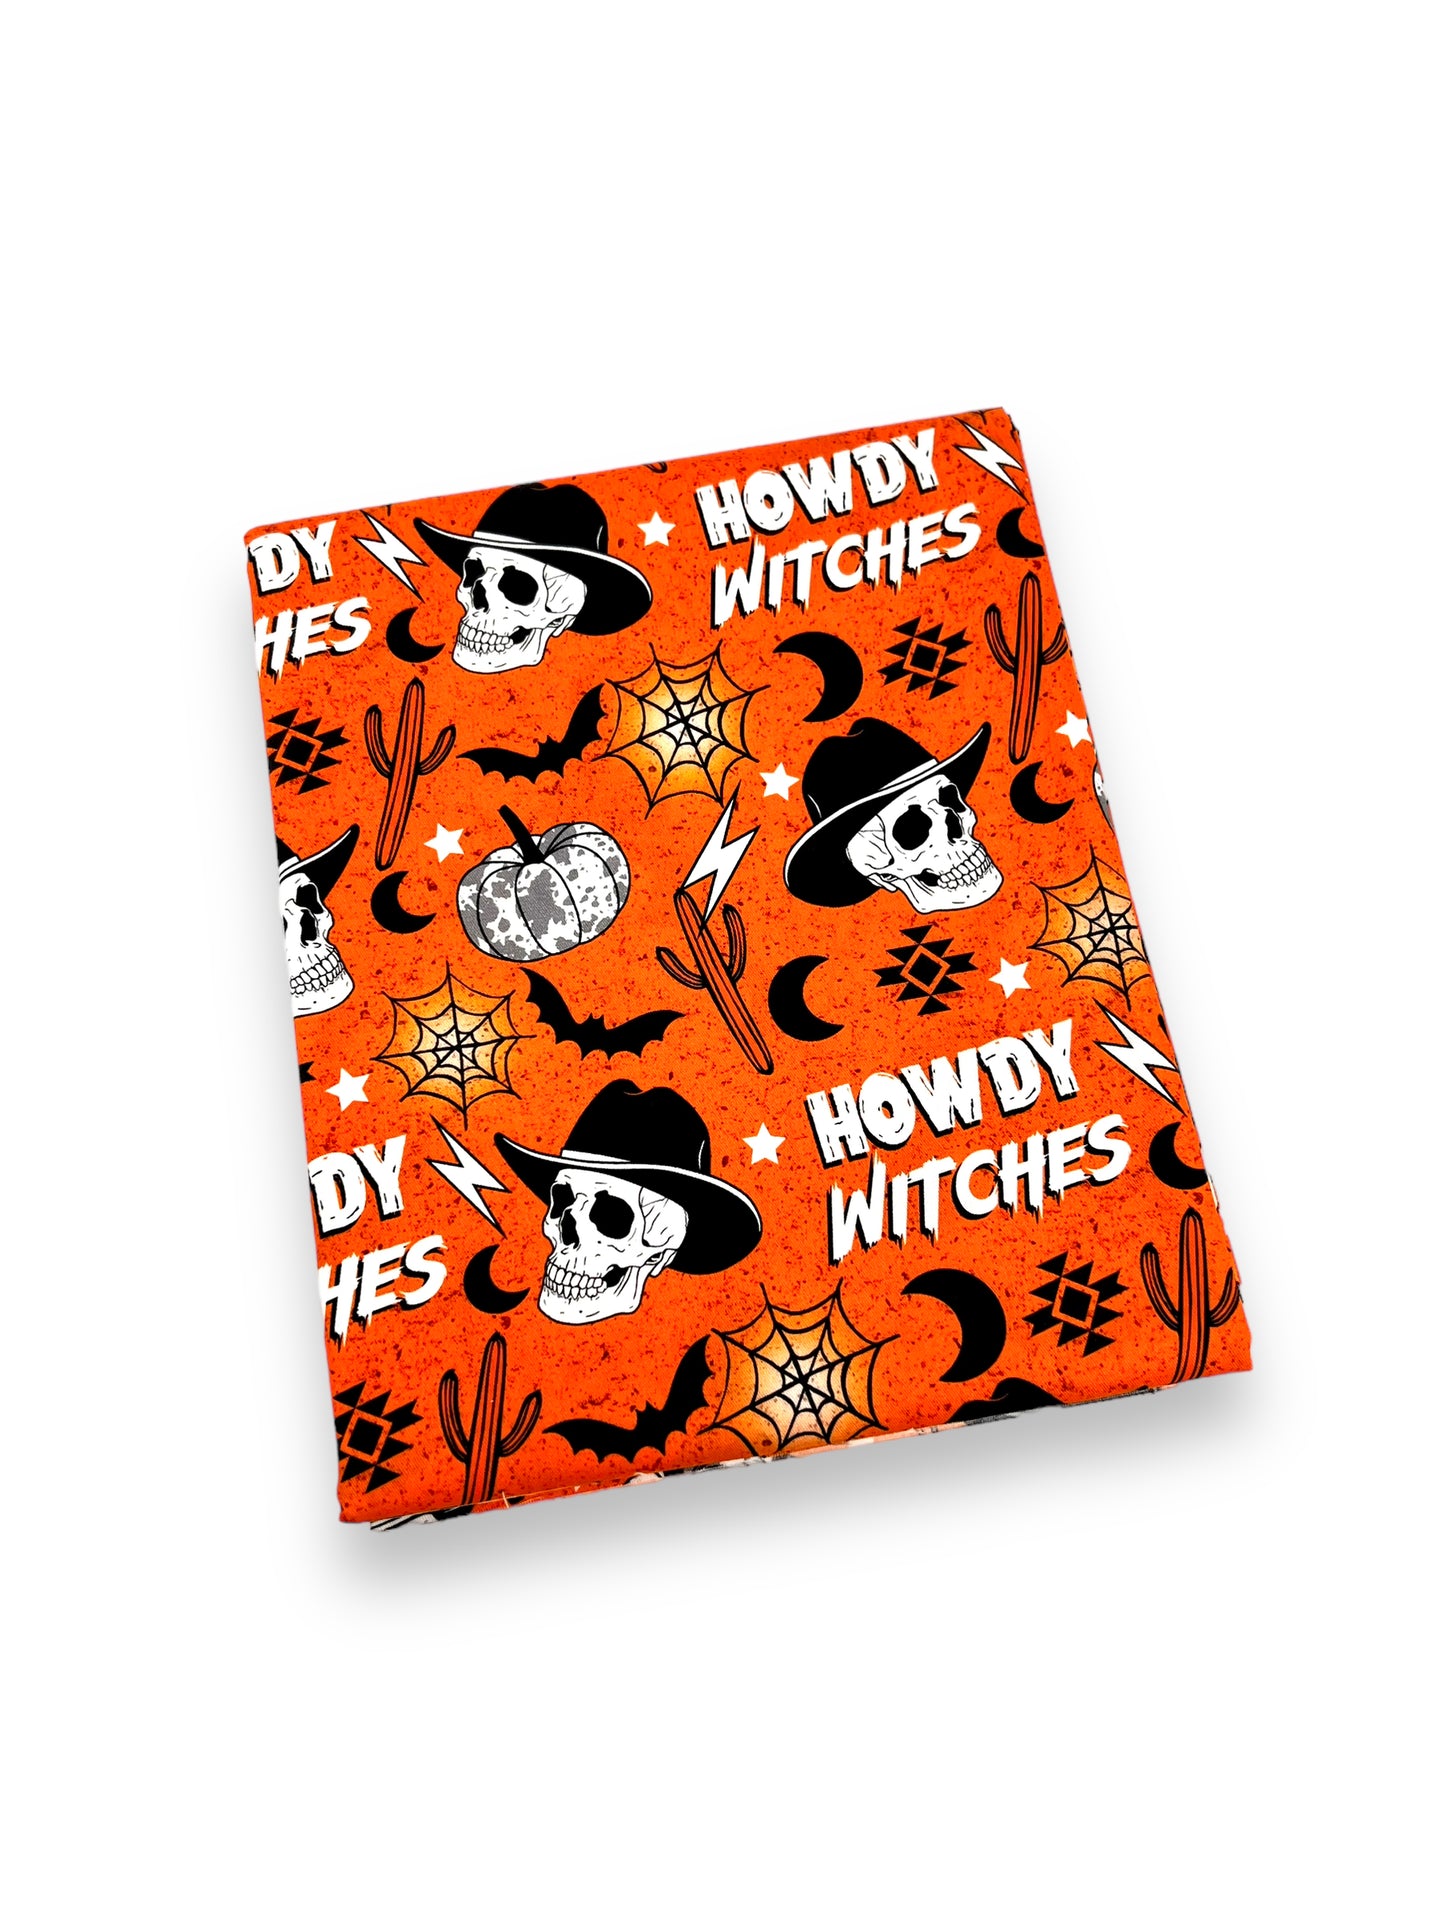 Retail - Howdy Witches